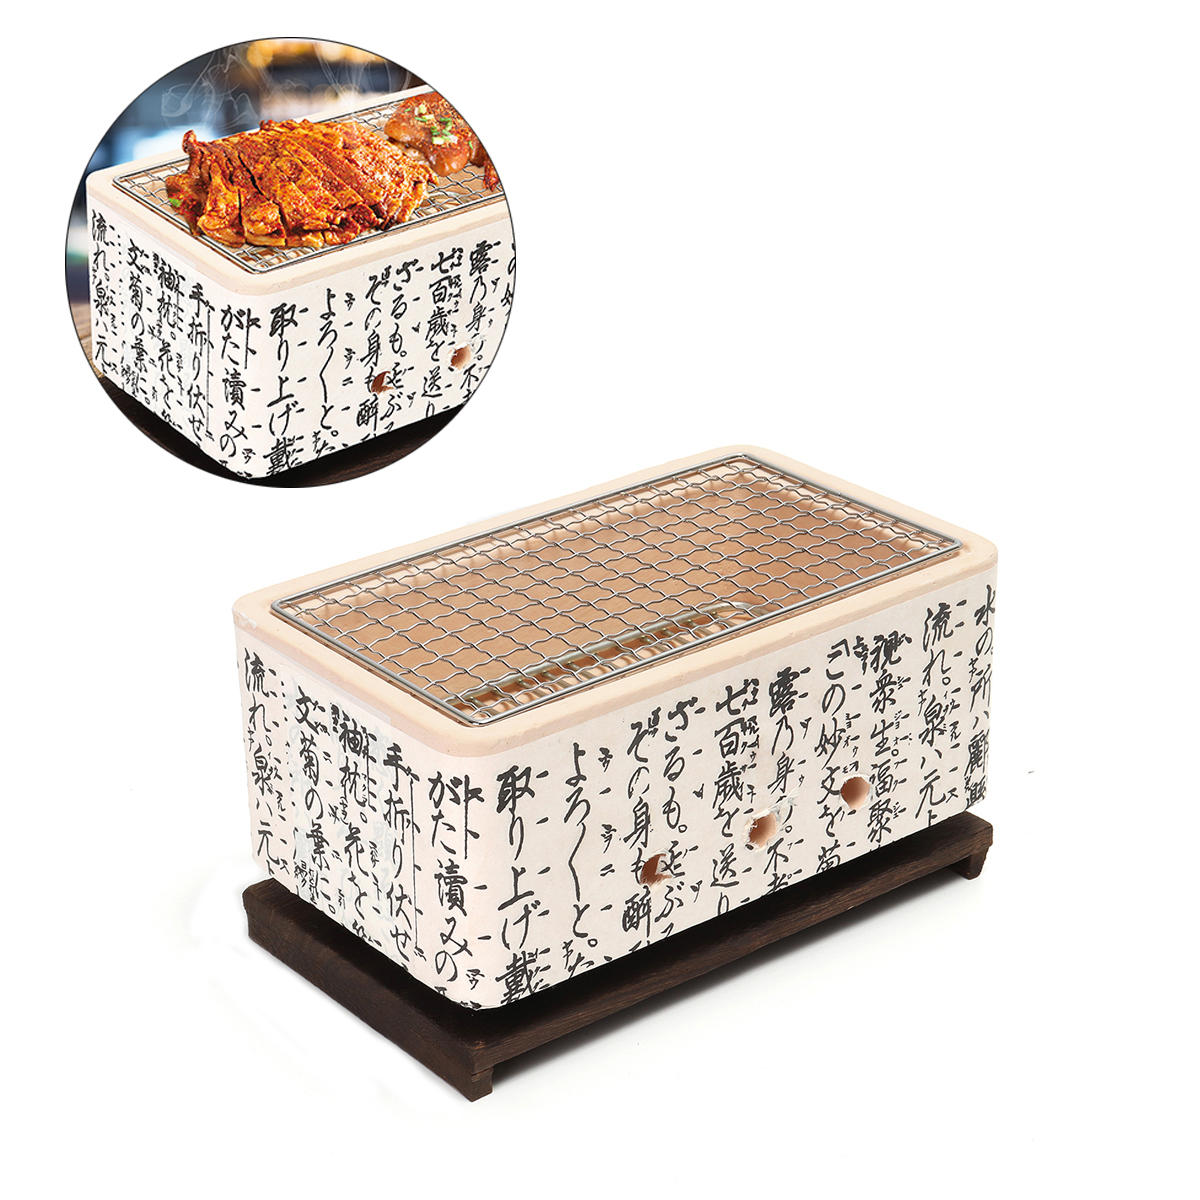 4 In 1 Japanese Korean Ceramic Hibachi BBQ Table Grill Yakitori Barbecue Charcoal Cooking Stove